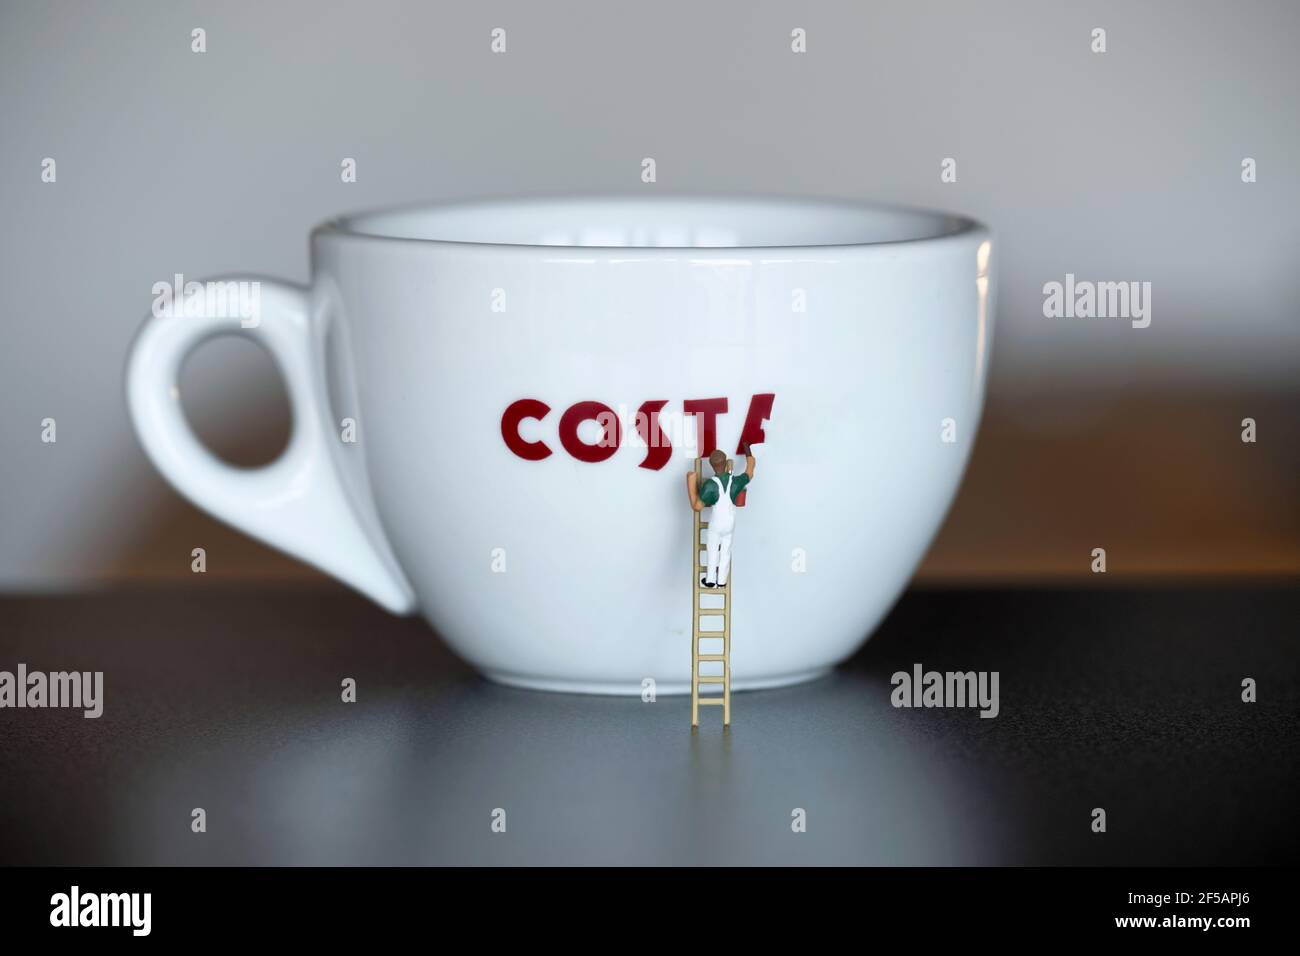 A small 00 scale miniature painter and decorator figure is shown using a ladder to paint the Costa coffee brand logo onto a costa coffee cup. Stock Photo